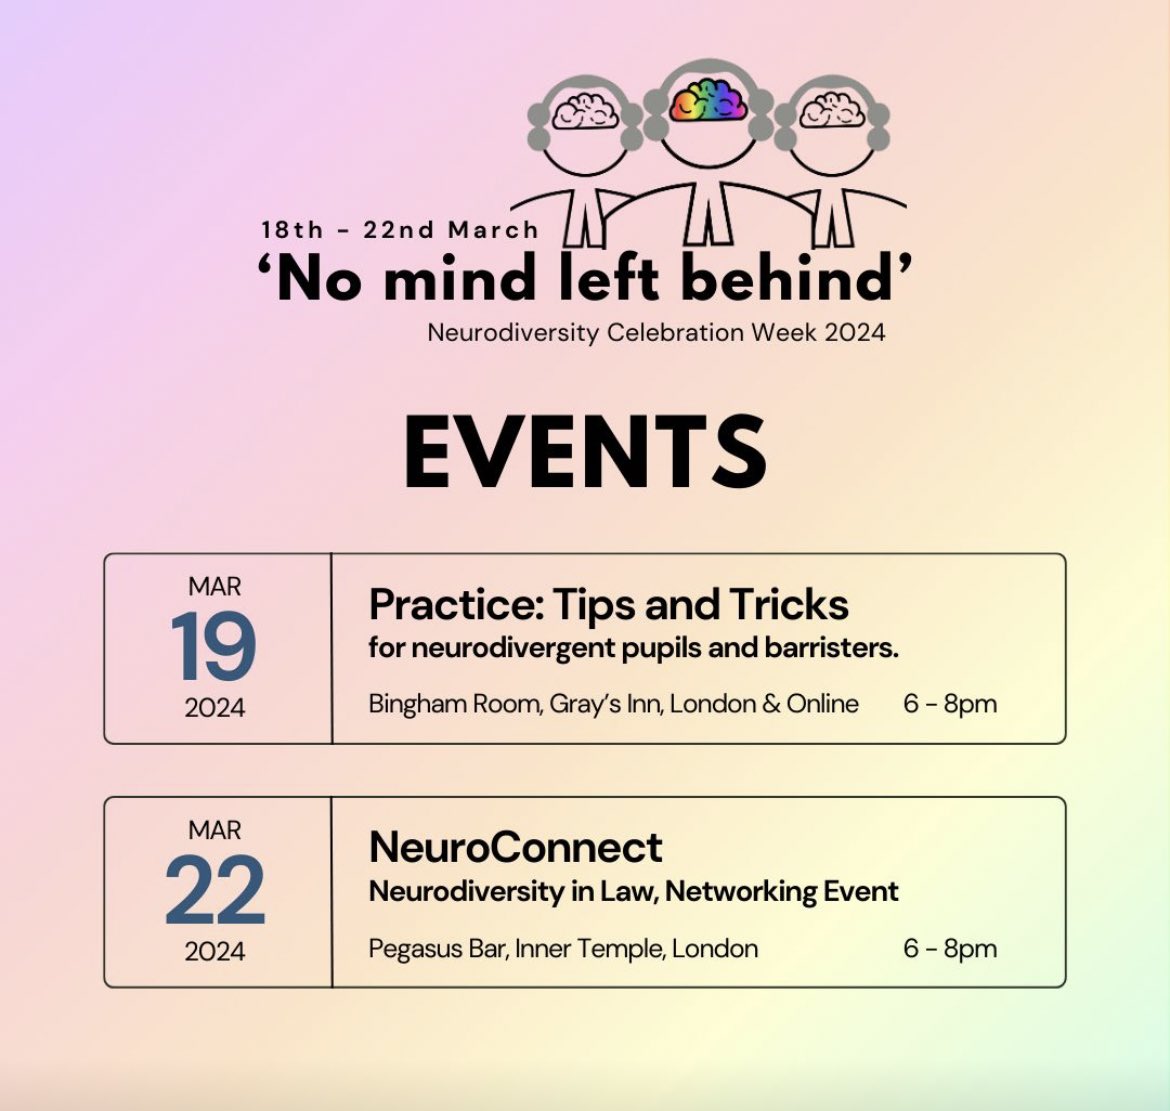 Join Neurodiversity in Law for Neurodiversity Celebration Week 2024! This year we are holding two events in London, and we'll be releasing plenty of content throughout the week! To register for our events, visit: neurodiversityinlaw.co.uk/ncw2024